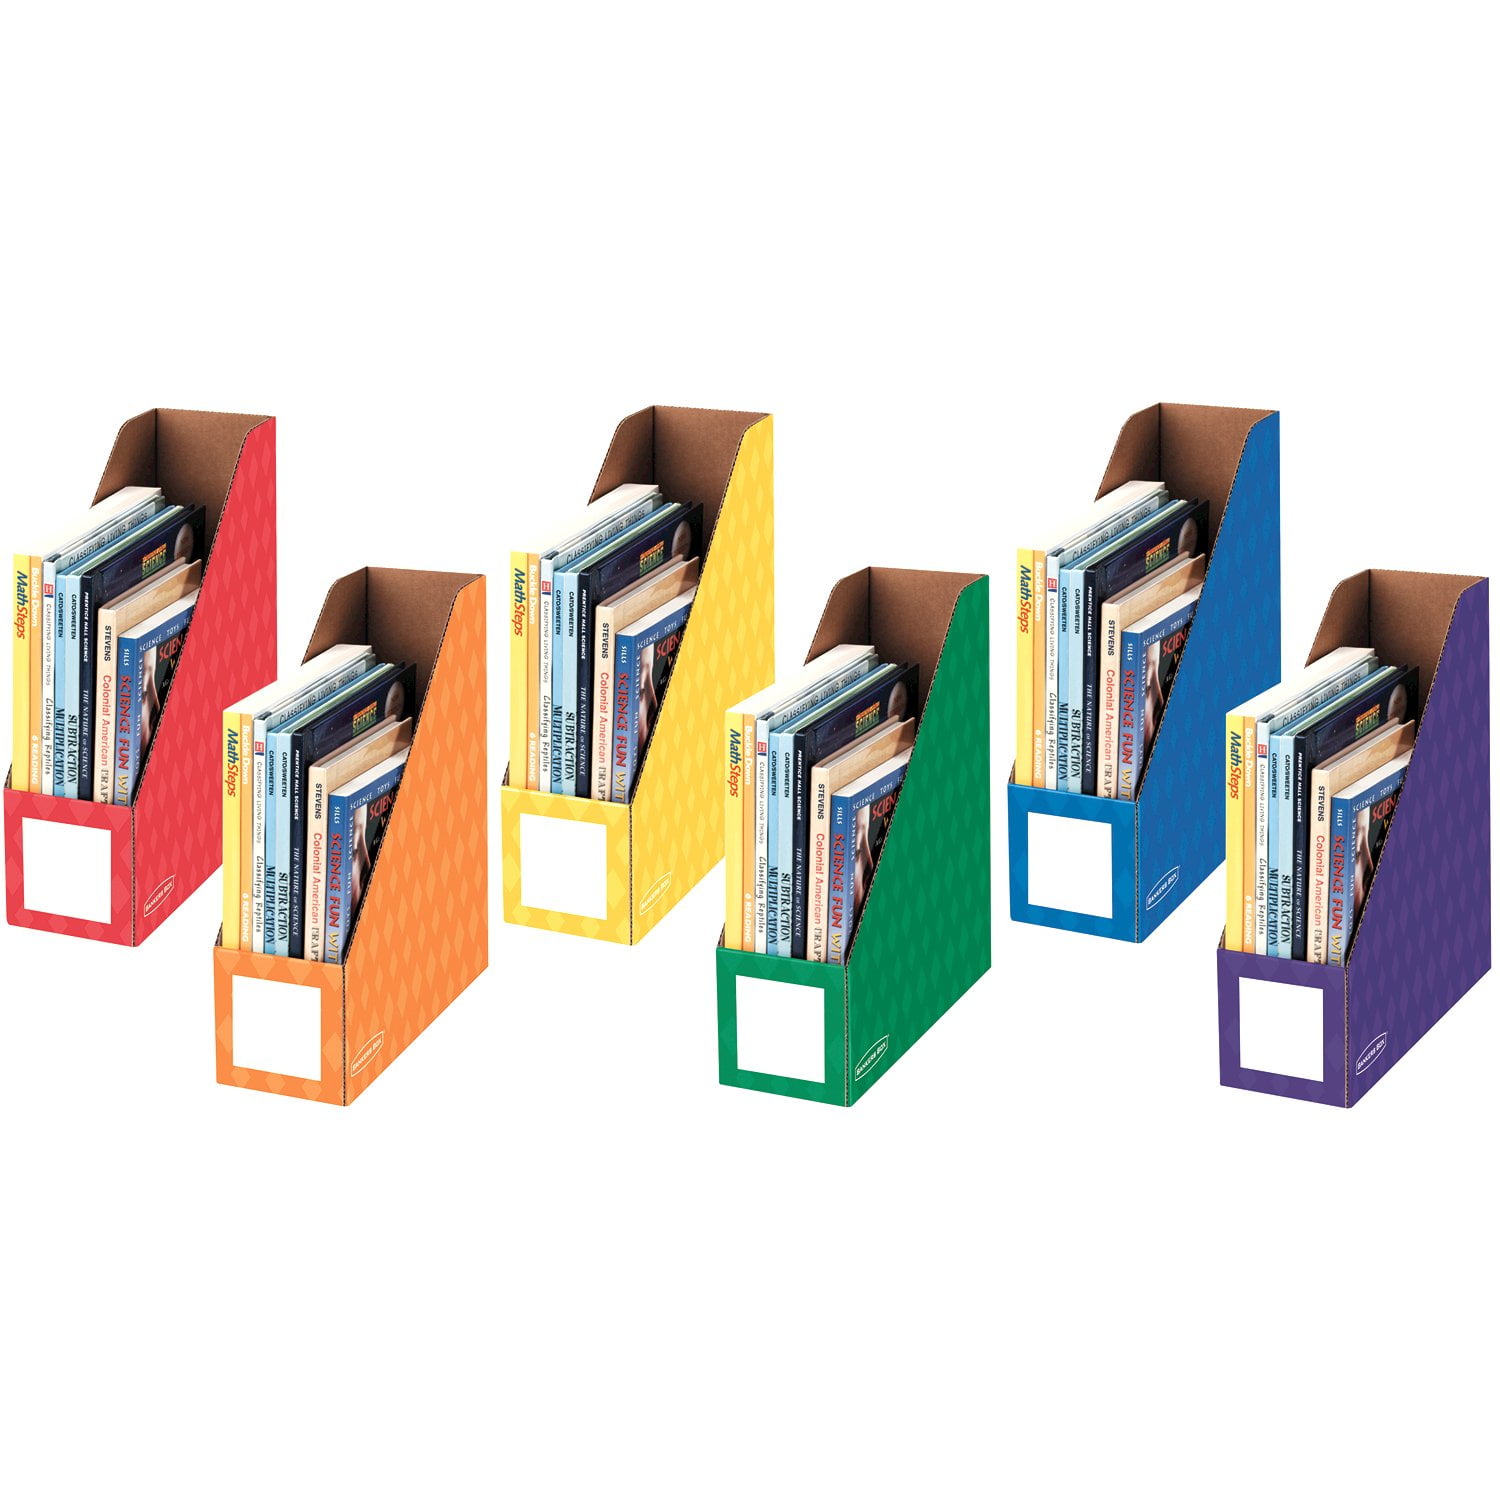 Bankers Box 4483401 A4 Magazine File Pack of 4 Assorted Colours